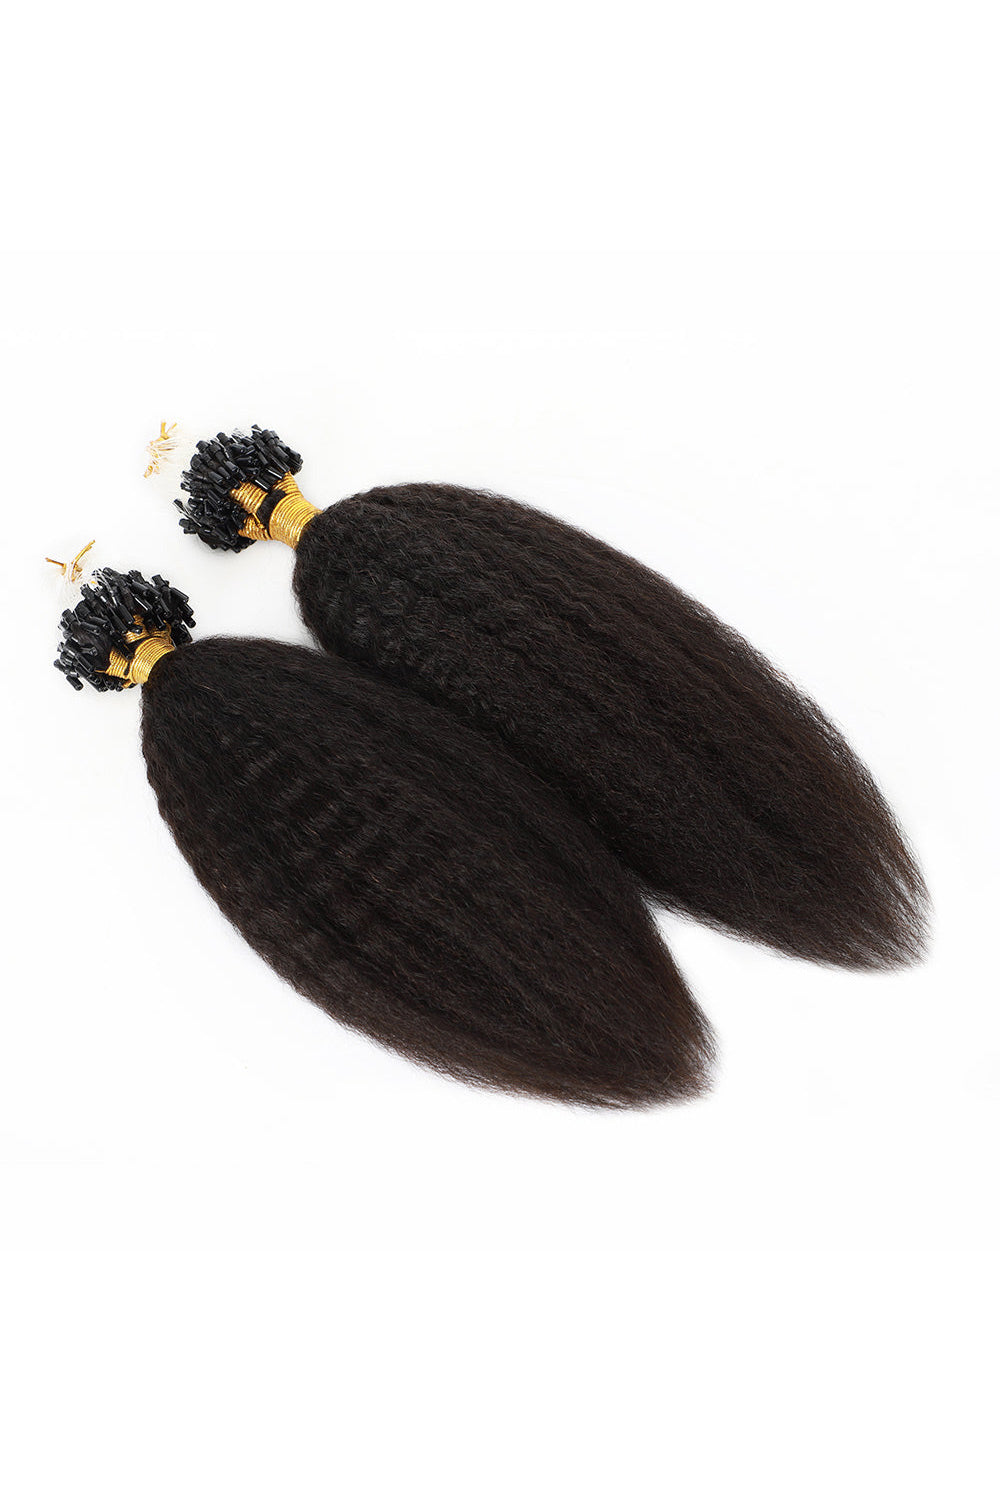 Micro Ring Human Hair Kinky Straight Extensions For Black Hair